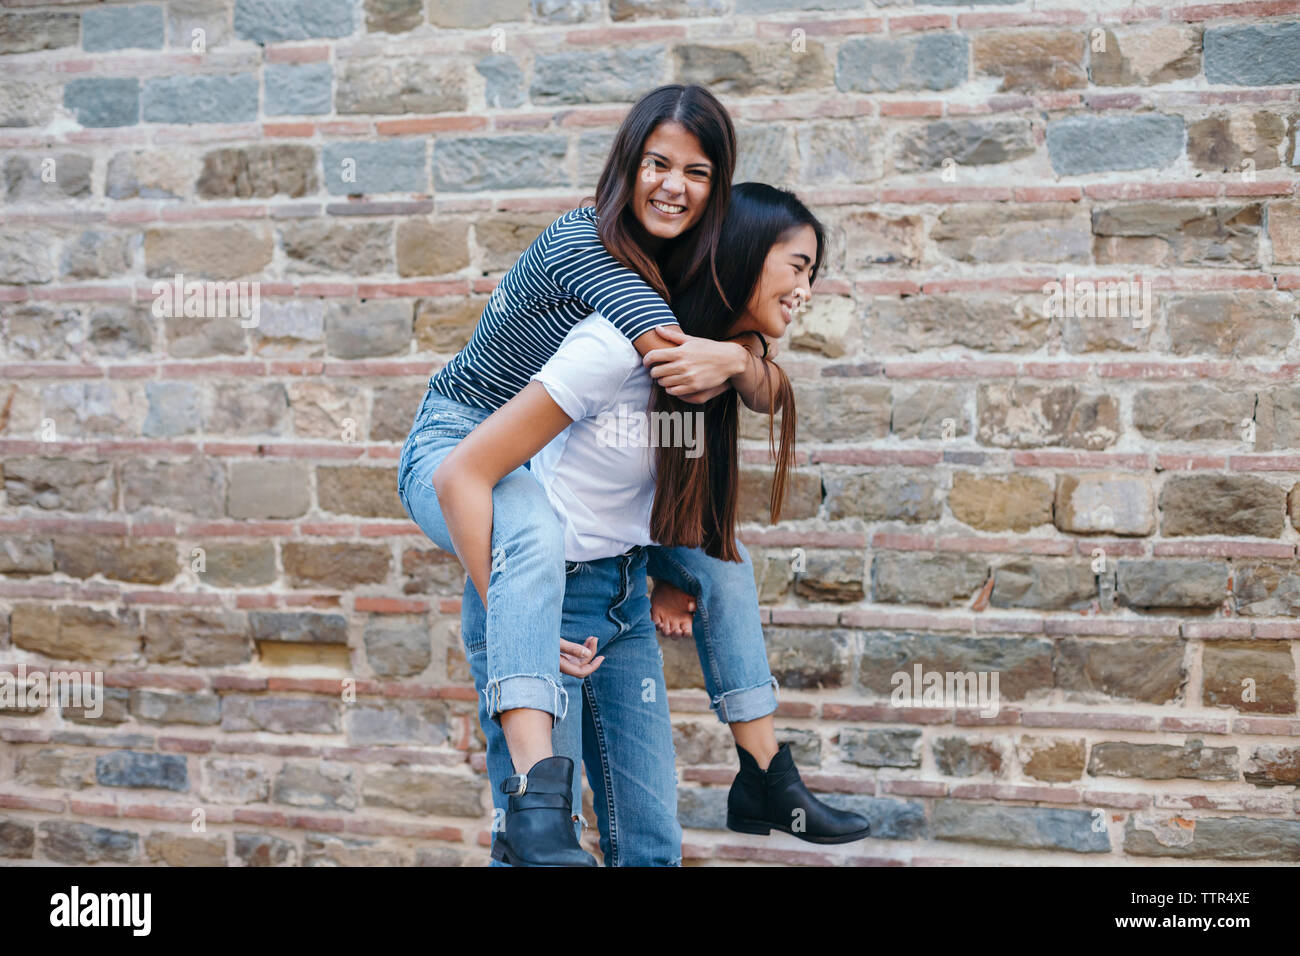 Happy woman piggybacking friend while standing by wall Stock Photo